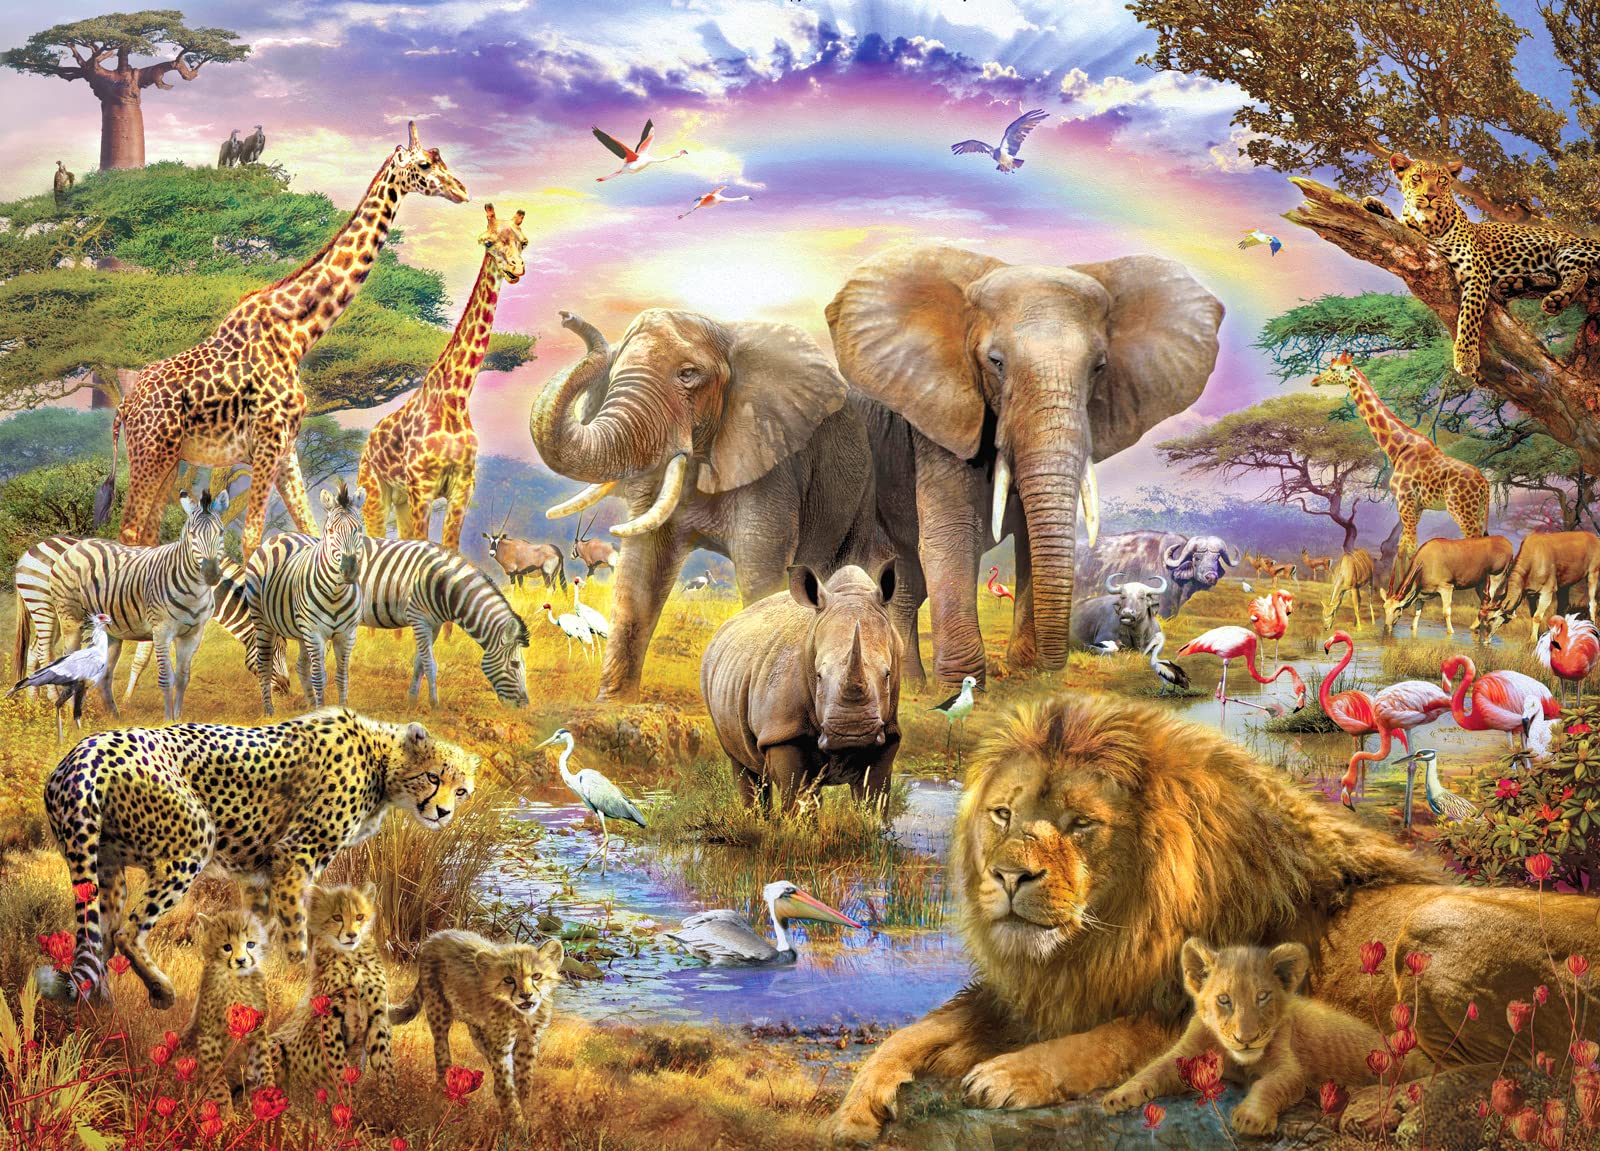 Jigsaw Puzzles 1000 Pieces African Animal Puzzles Animal World Jigsaw Puzzles for Adult Teens Kids Jungle Scene Jigsaw Puzzles Game Toy Gift Home Decoration